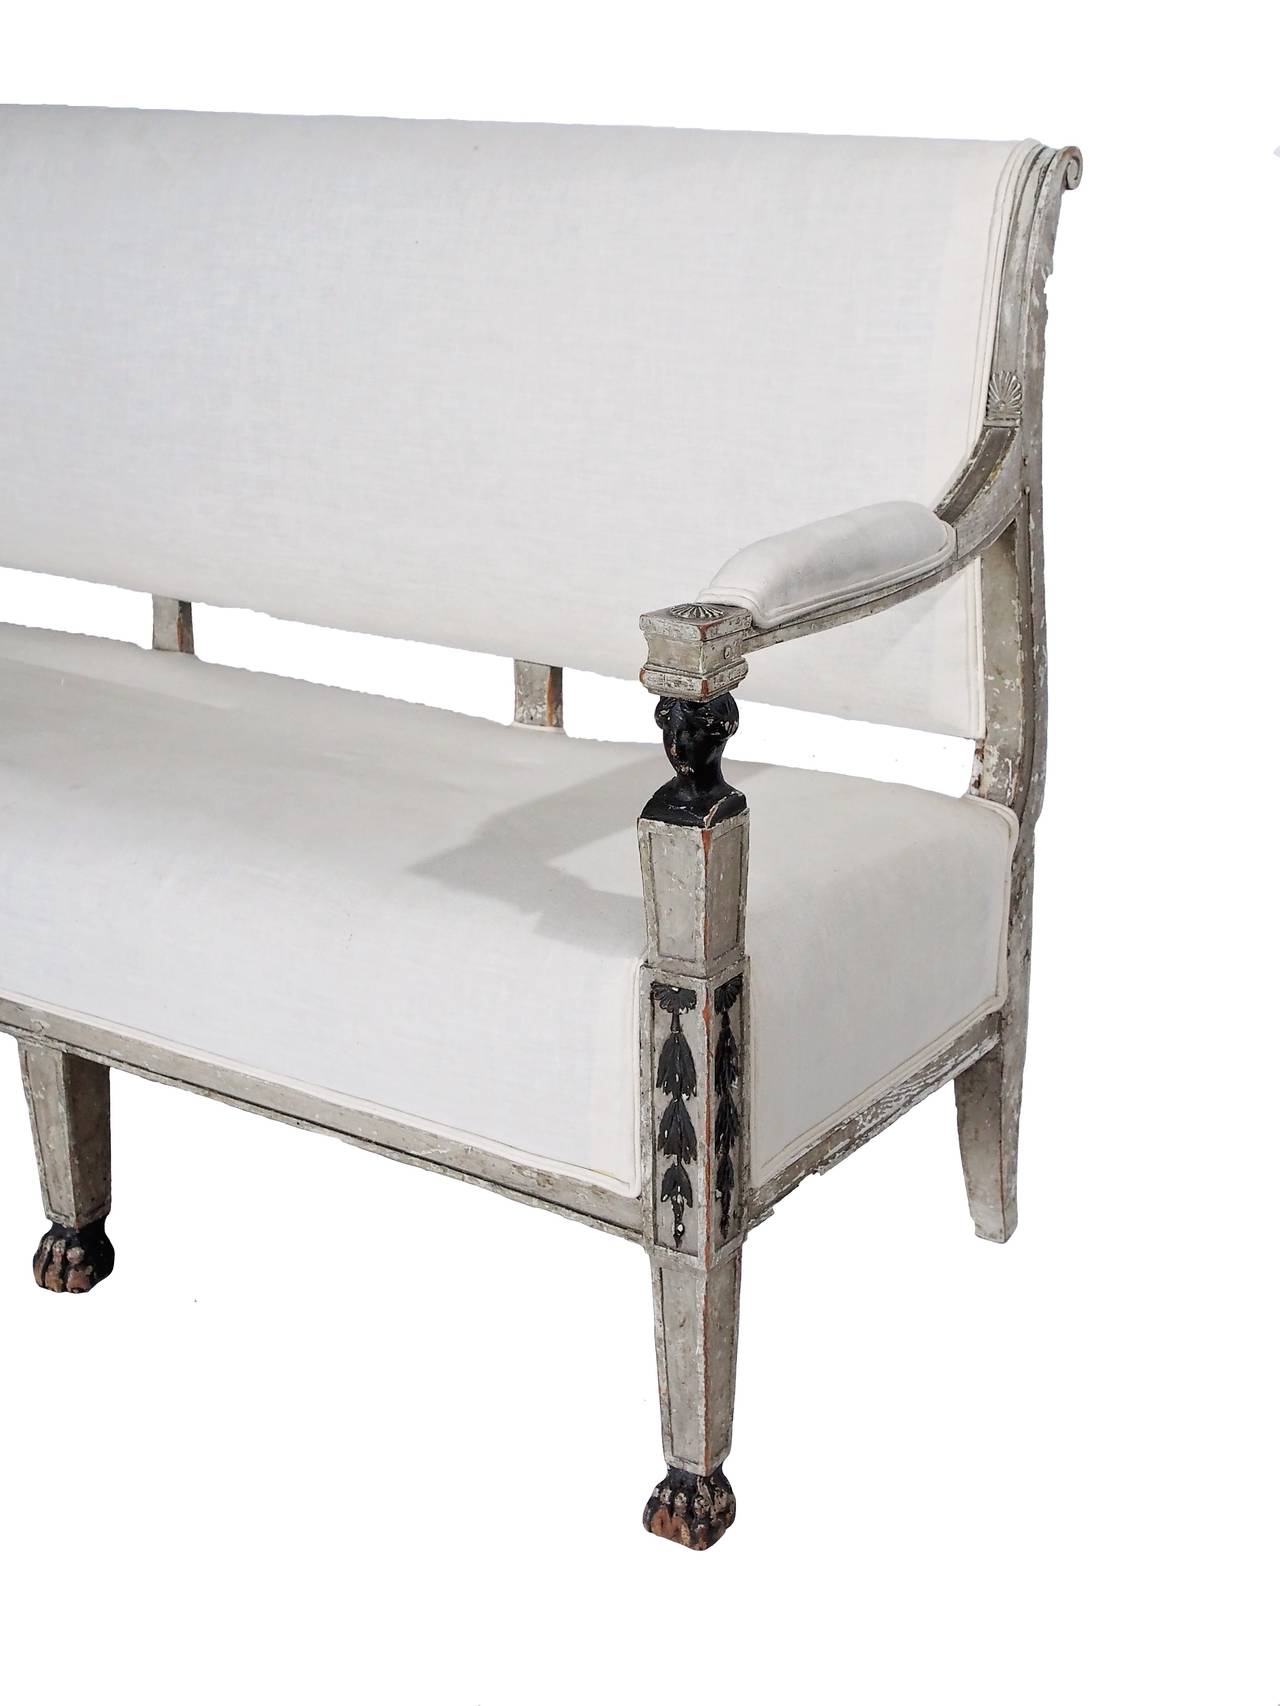 Gorgeous Canapé with Egyptian influence. Linen upholstery in creamy white color. Perfect for a narrow hallway.